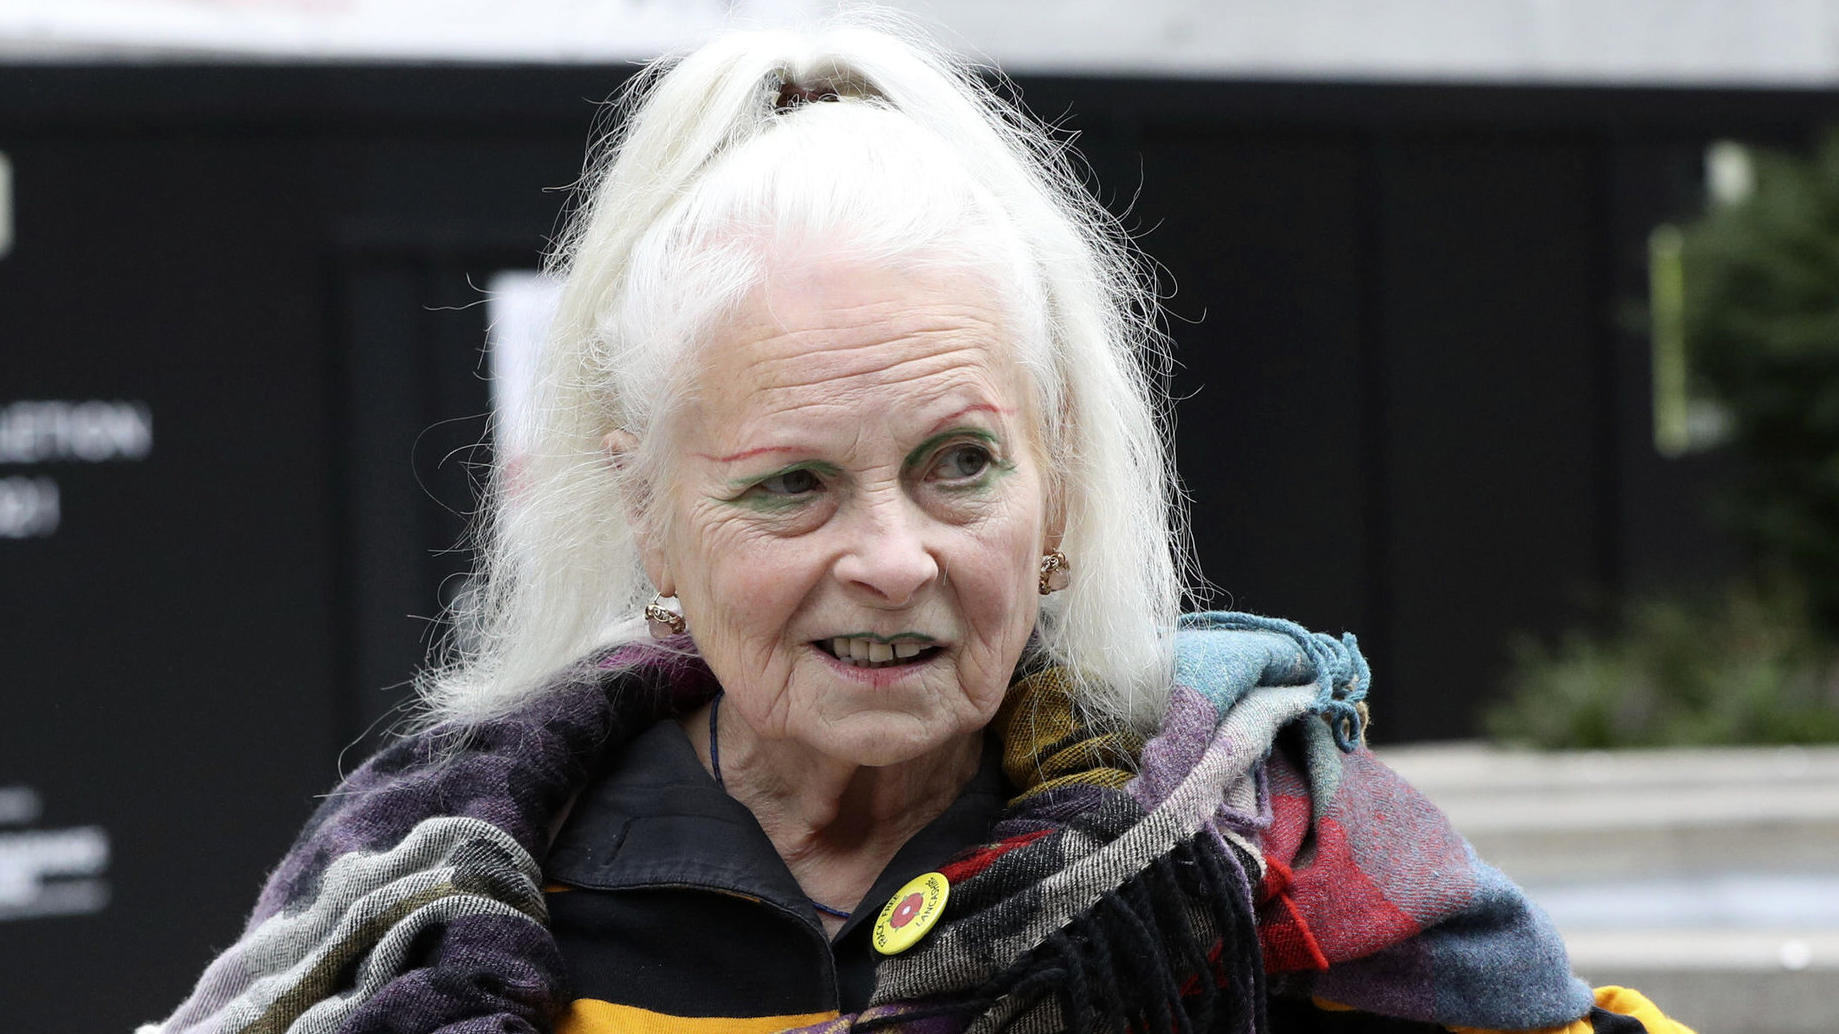 British designer Vivienne Westwood holds a ball with the writing Justice on it as she arrives at a London Court ahead of a hearing on the extradition to the United States of Wikileaks founder Julian Assange, in London, Monday, Sept. 7, 2020. Lawyers 